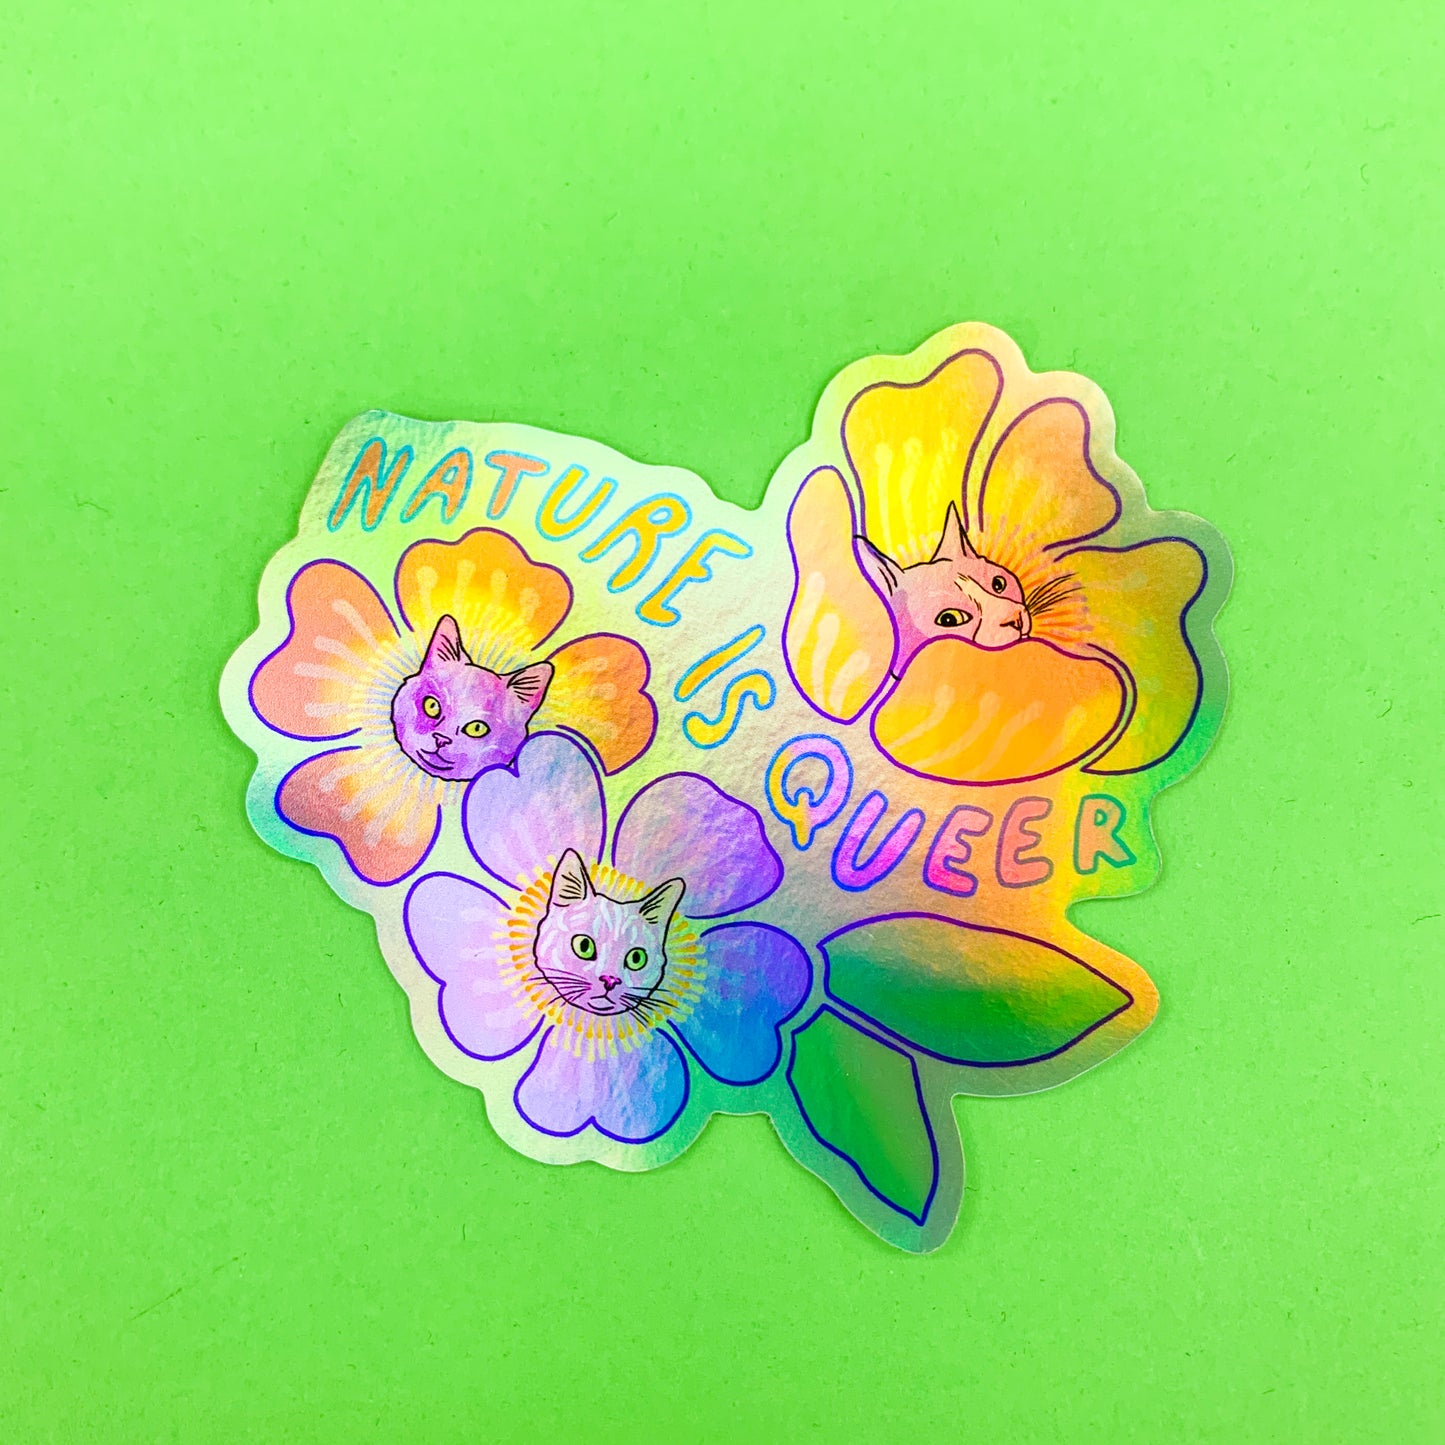 Nature is Queer Sticker